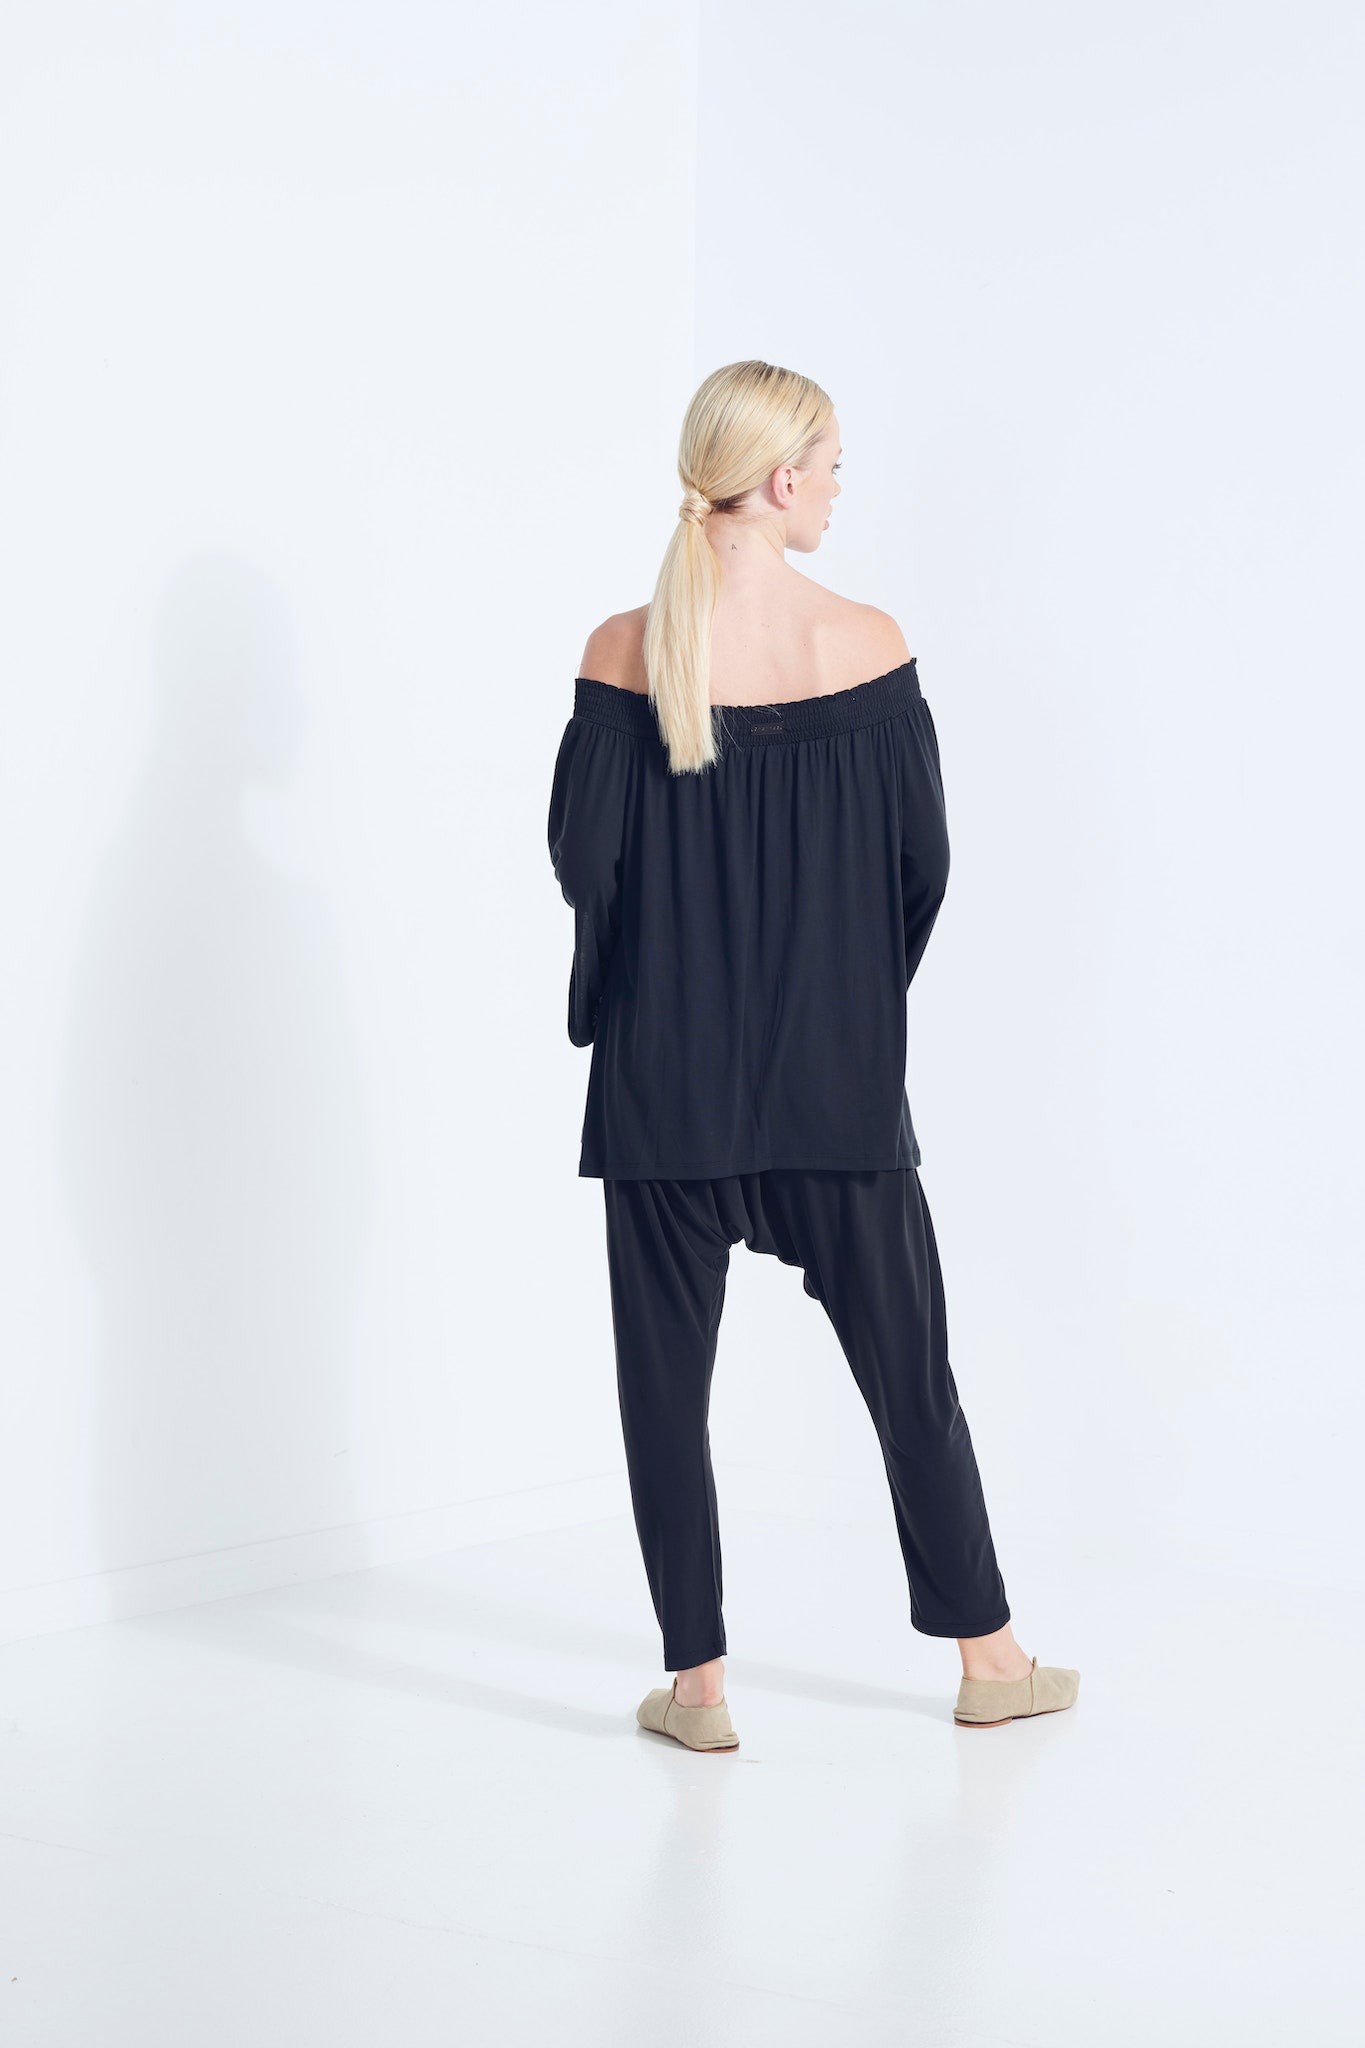 NAEVIA OFF SHOULDER TOP KNIT BEECHWOOD MODAL ELASTIC TOP WITH BELL SLEEVE WASHED BLACK DARK BACK VIEW